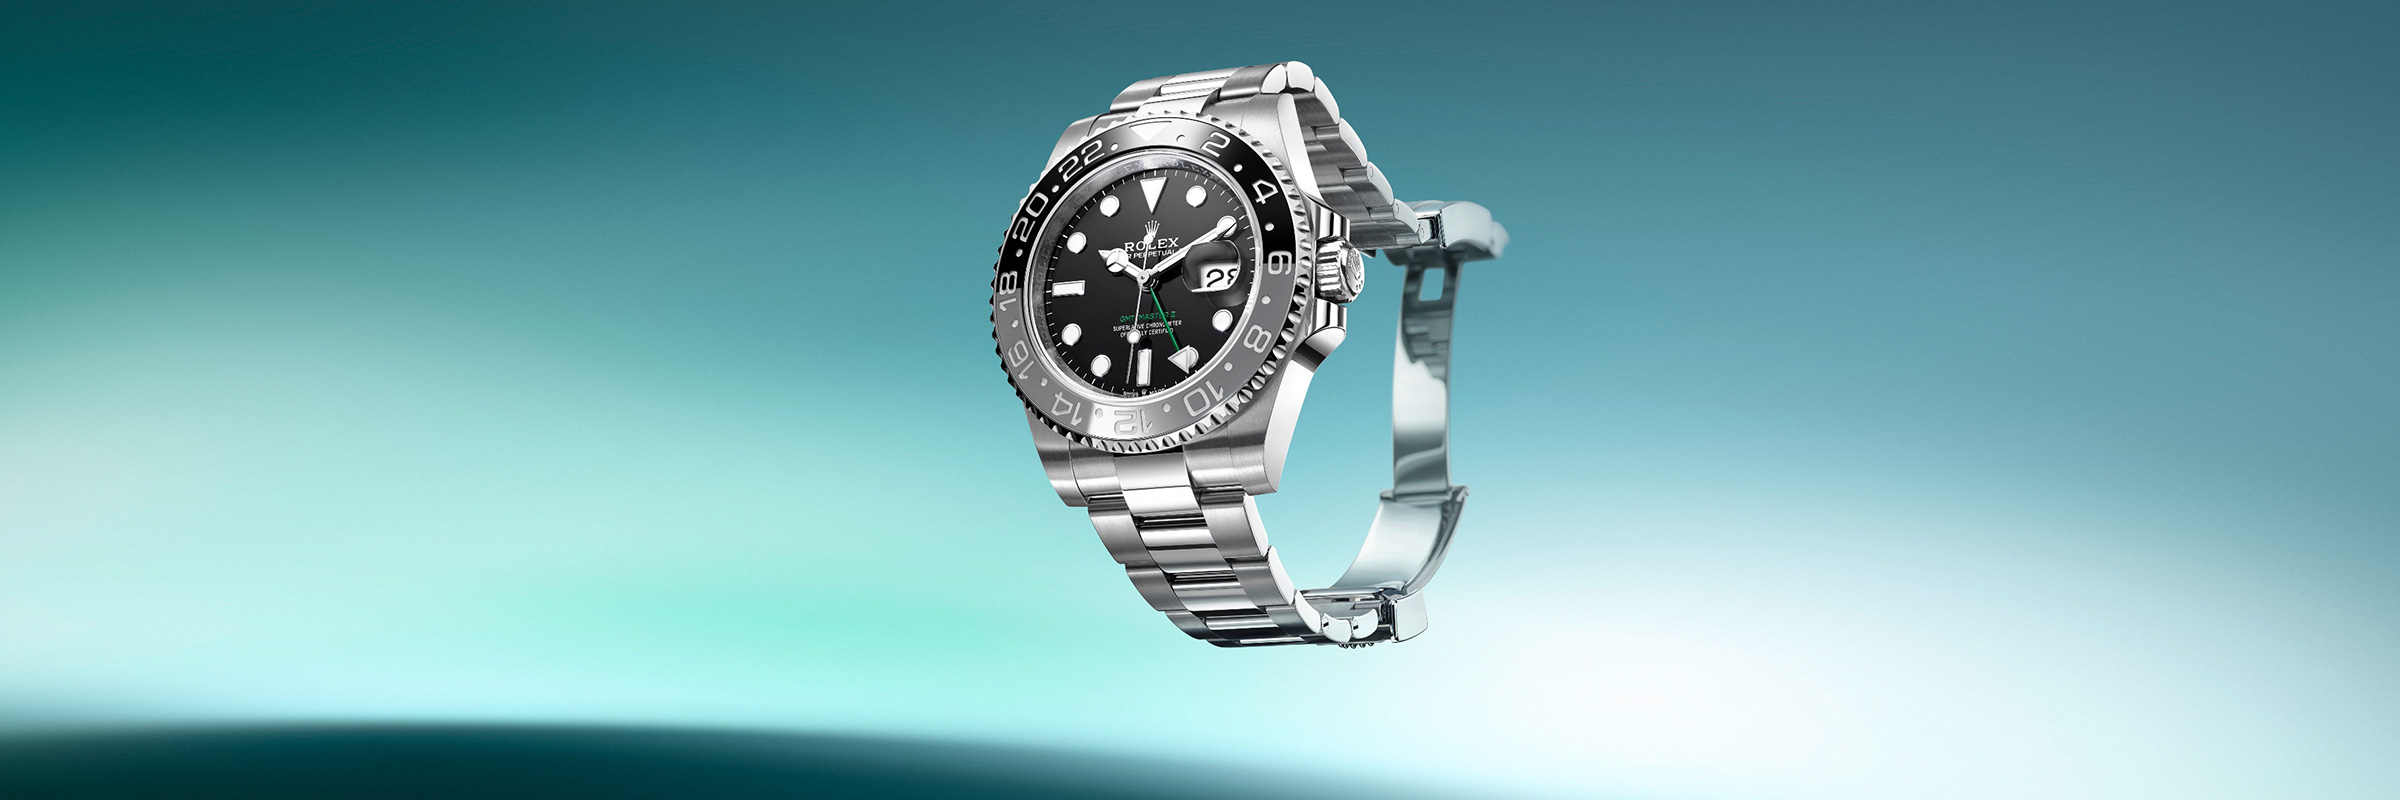 With its latest creations, Rolex brings a fresh new look to some of its most iconic models.